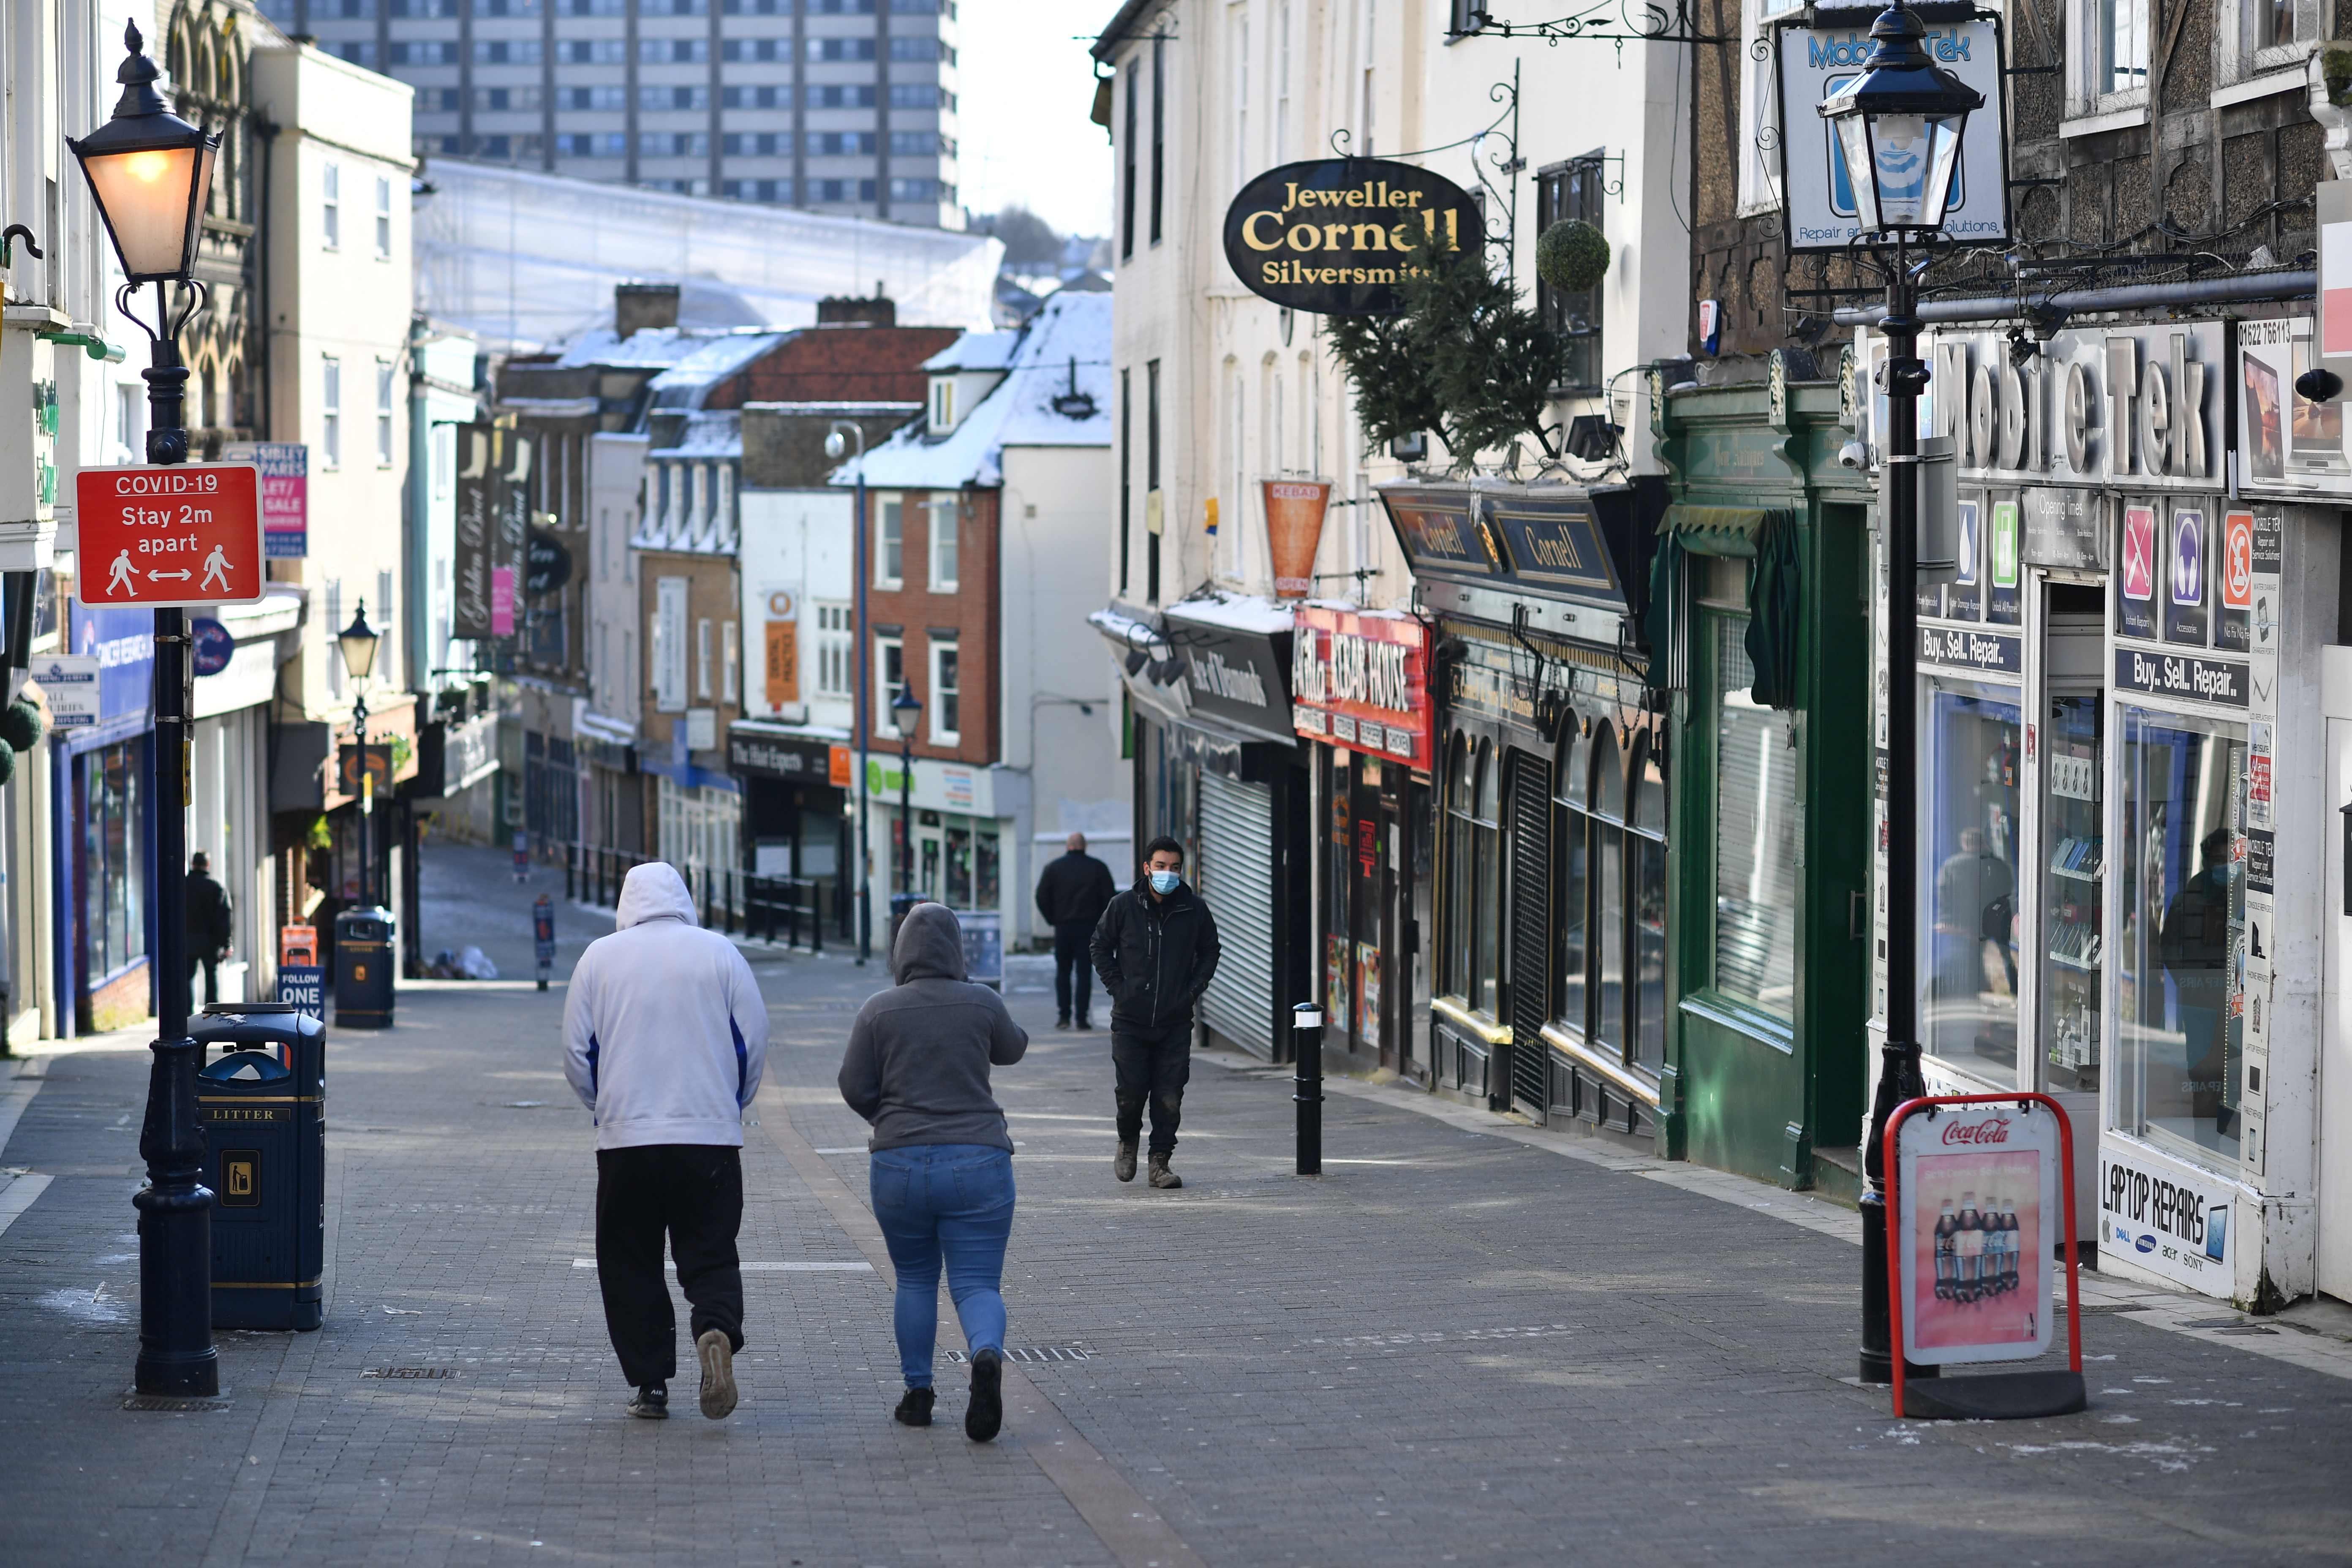 Rishi Sunak said the scheme will ‘ensure our high streets can open their doors with optimism’